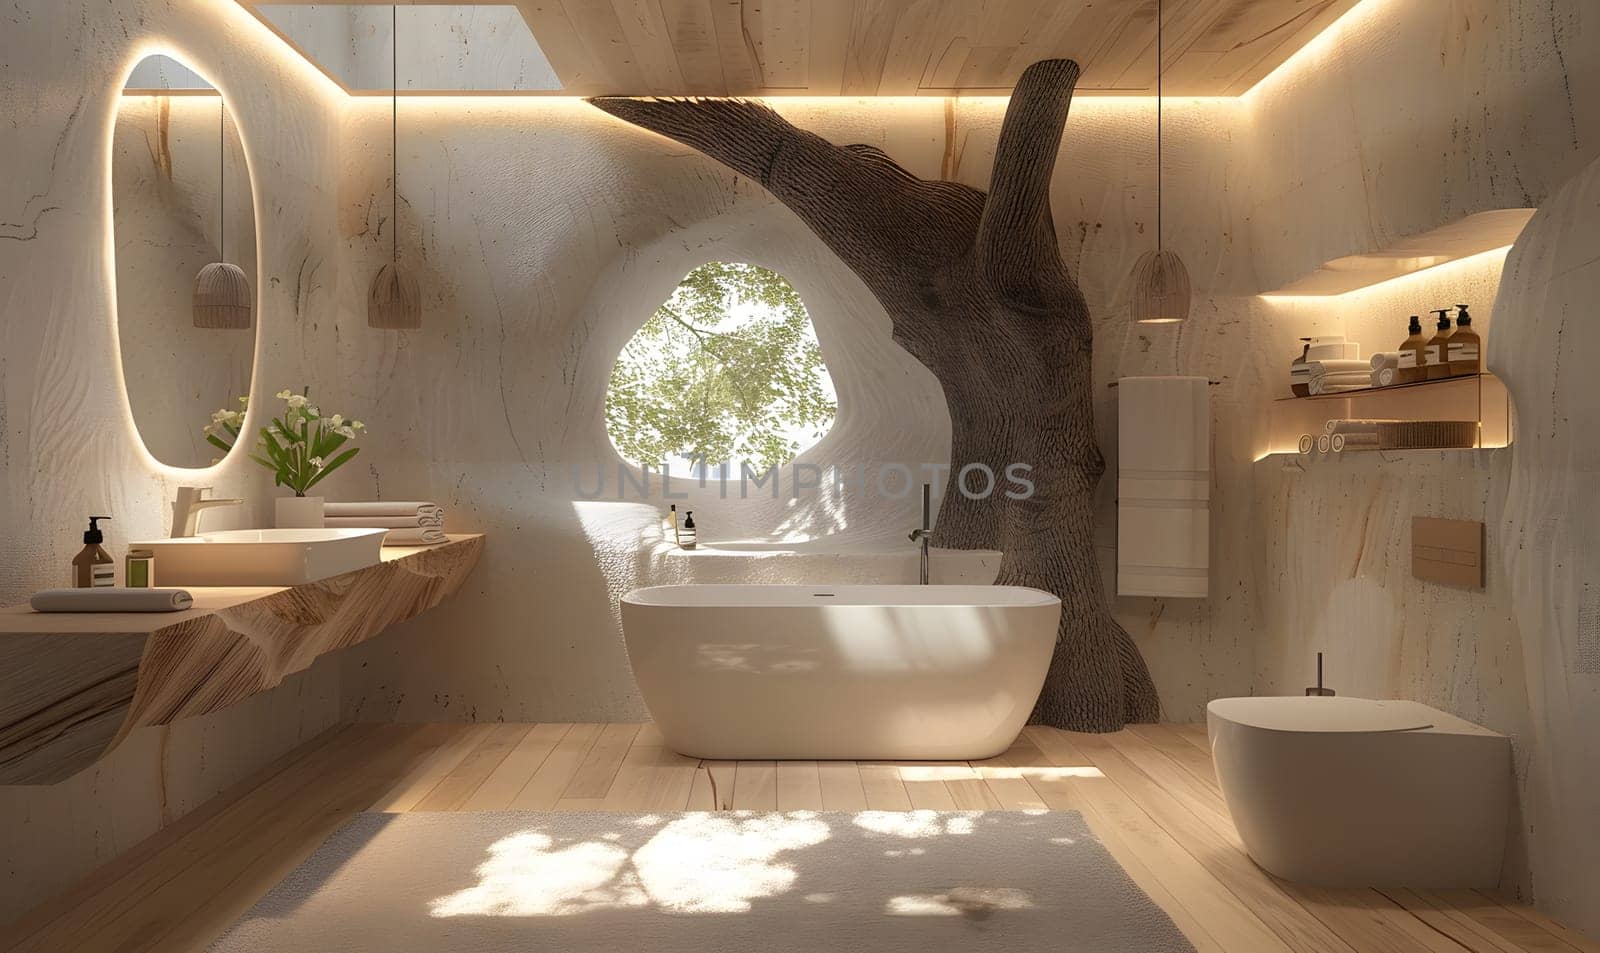 A bathroom with a tree planted in the middle, creating a unique interior design in a building. The hardwood flooring, wooden countertop, and arched ceiling complement the natural element